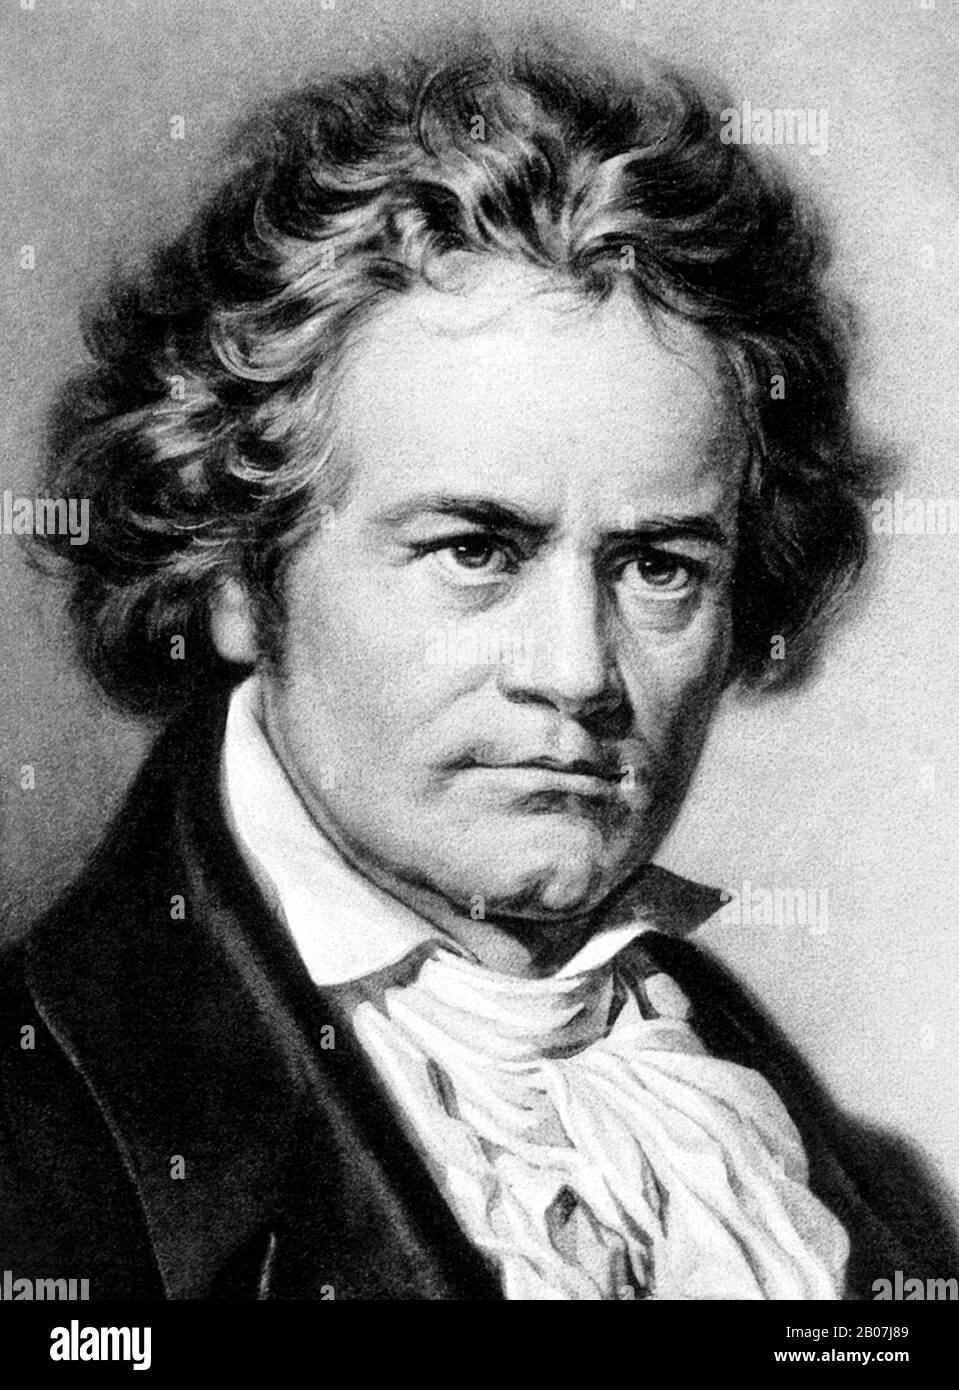 Vintage portrait of German composer and pianist Ludwig van Beethoven (1770 – 1827). Detail from a print circa 1902 by W L Haskell. Stock Photo